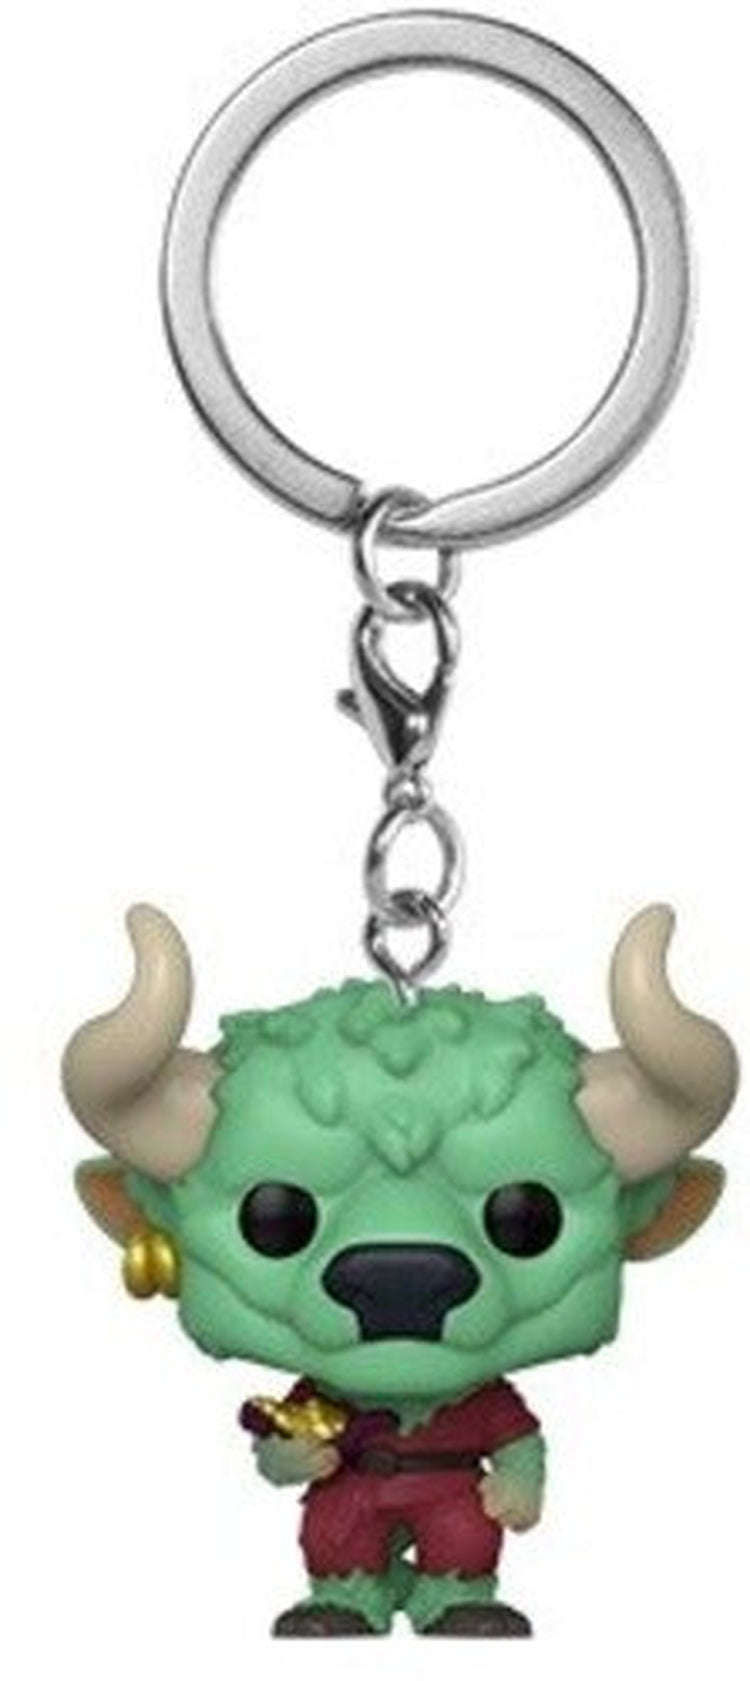 FUNKO POP! KEYCHAIN: Dr. Strange in the Multiverse of Madness - Rintrah